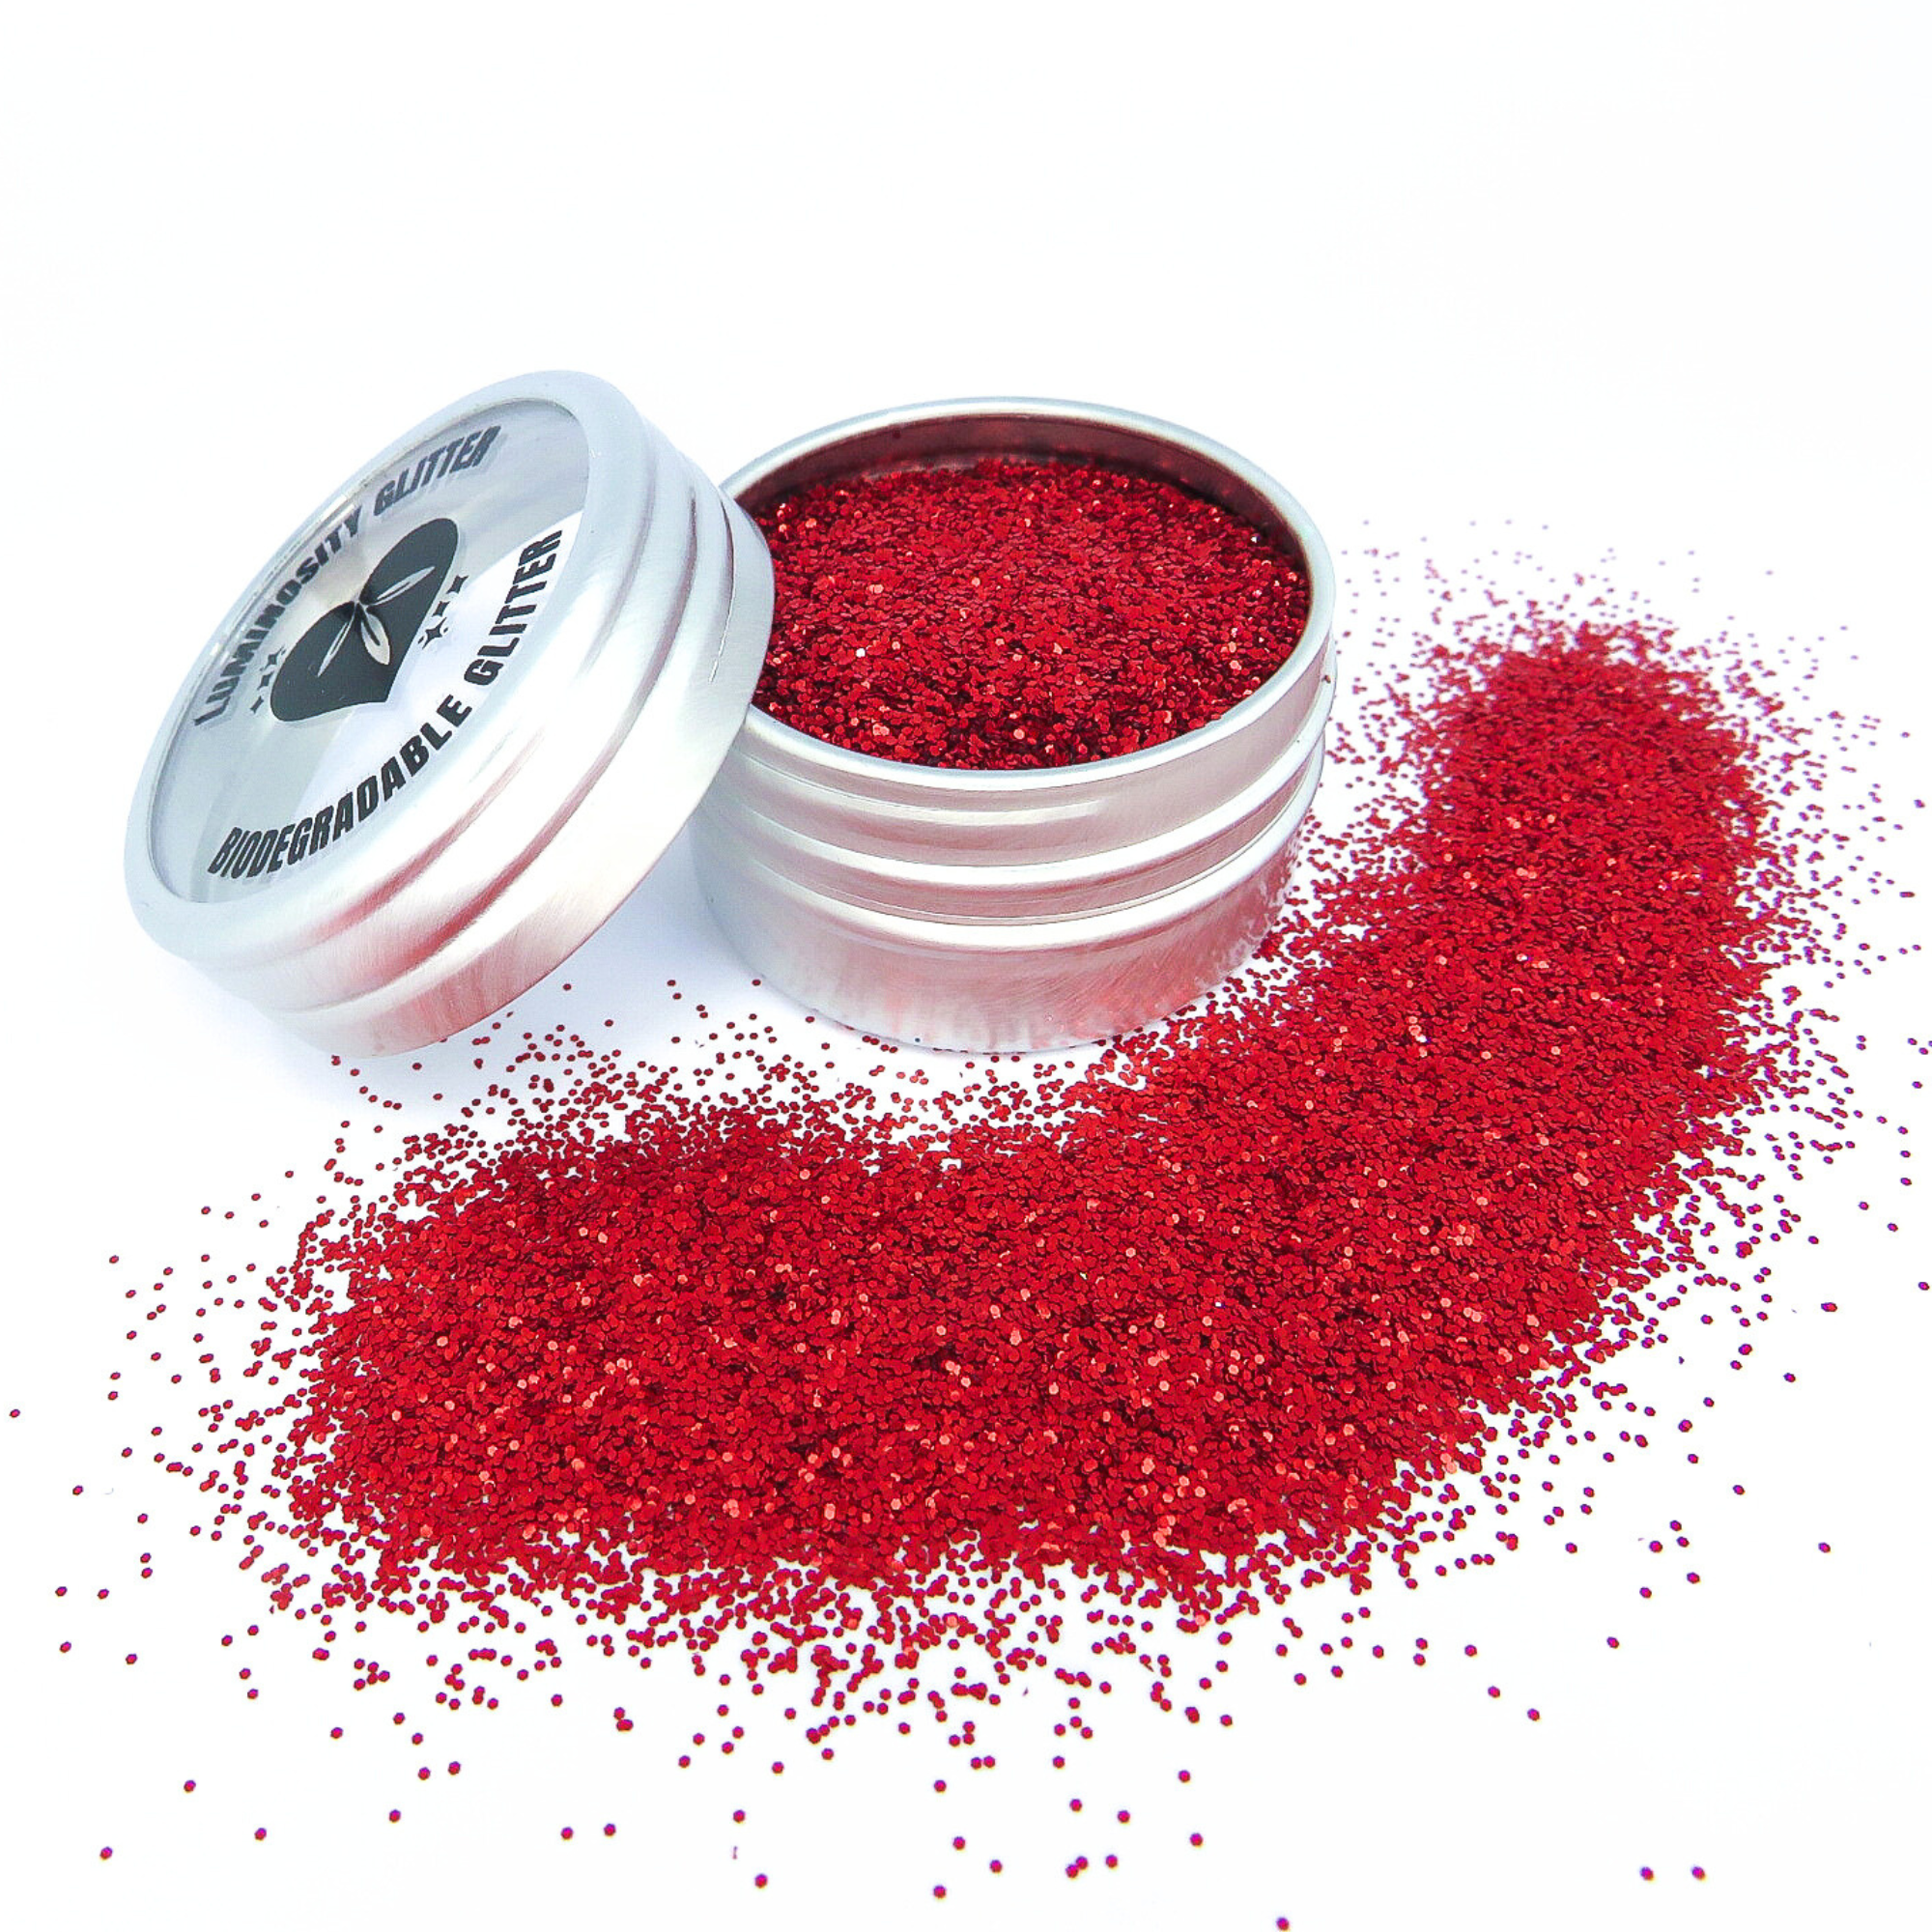 Ruby red biodegradable glitter in a true red shade.